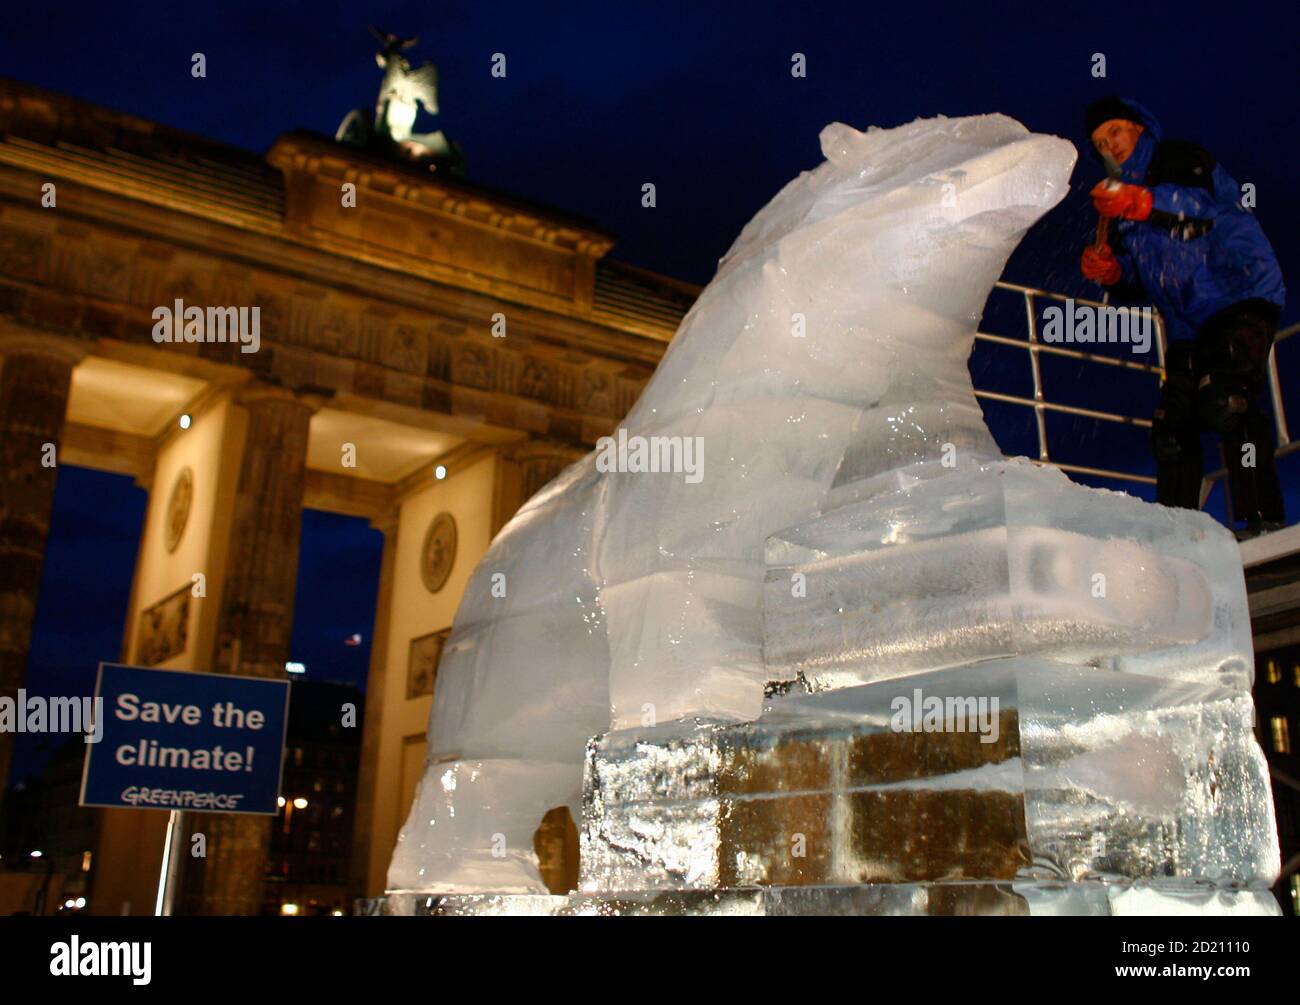 German ice sculpture artist Christian Funk, carves a polar bear out of 15 tons of ice near the Brandenburg Gate in Berlin, December 7, 2007. According to Greenpeace, the ice sculpture is a memorial for climate protection. The sculpture is four meters high, four meters long and 1,5 meters wide. REUTERS/Johannes Eisele (GERMANY) Stock Photo